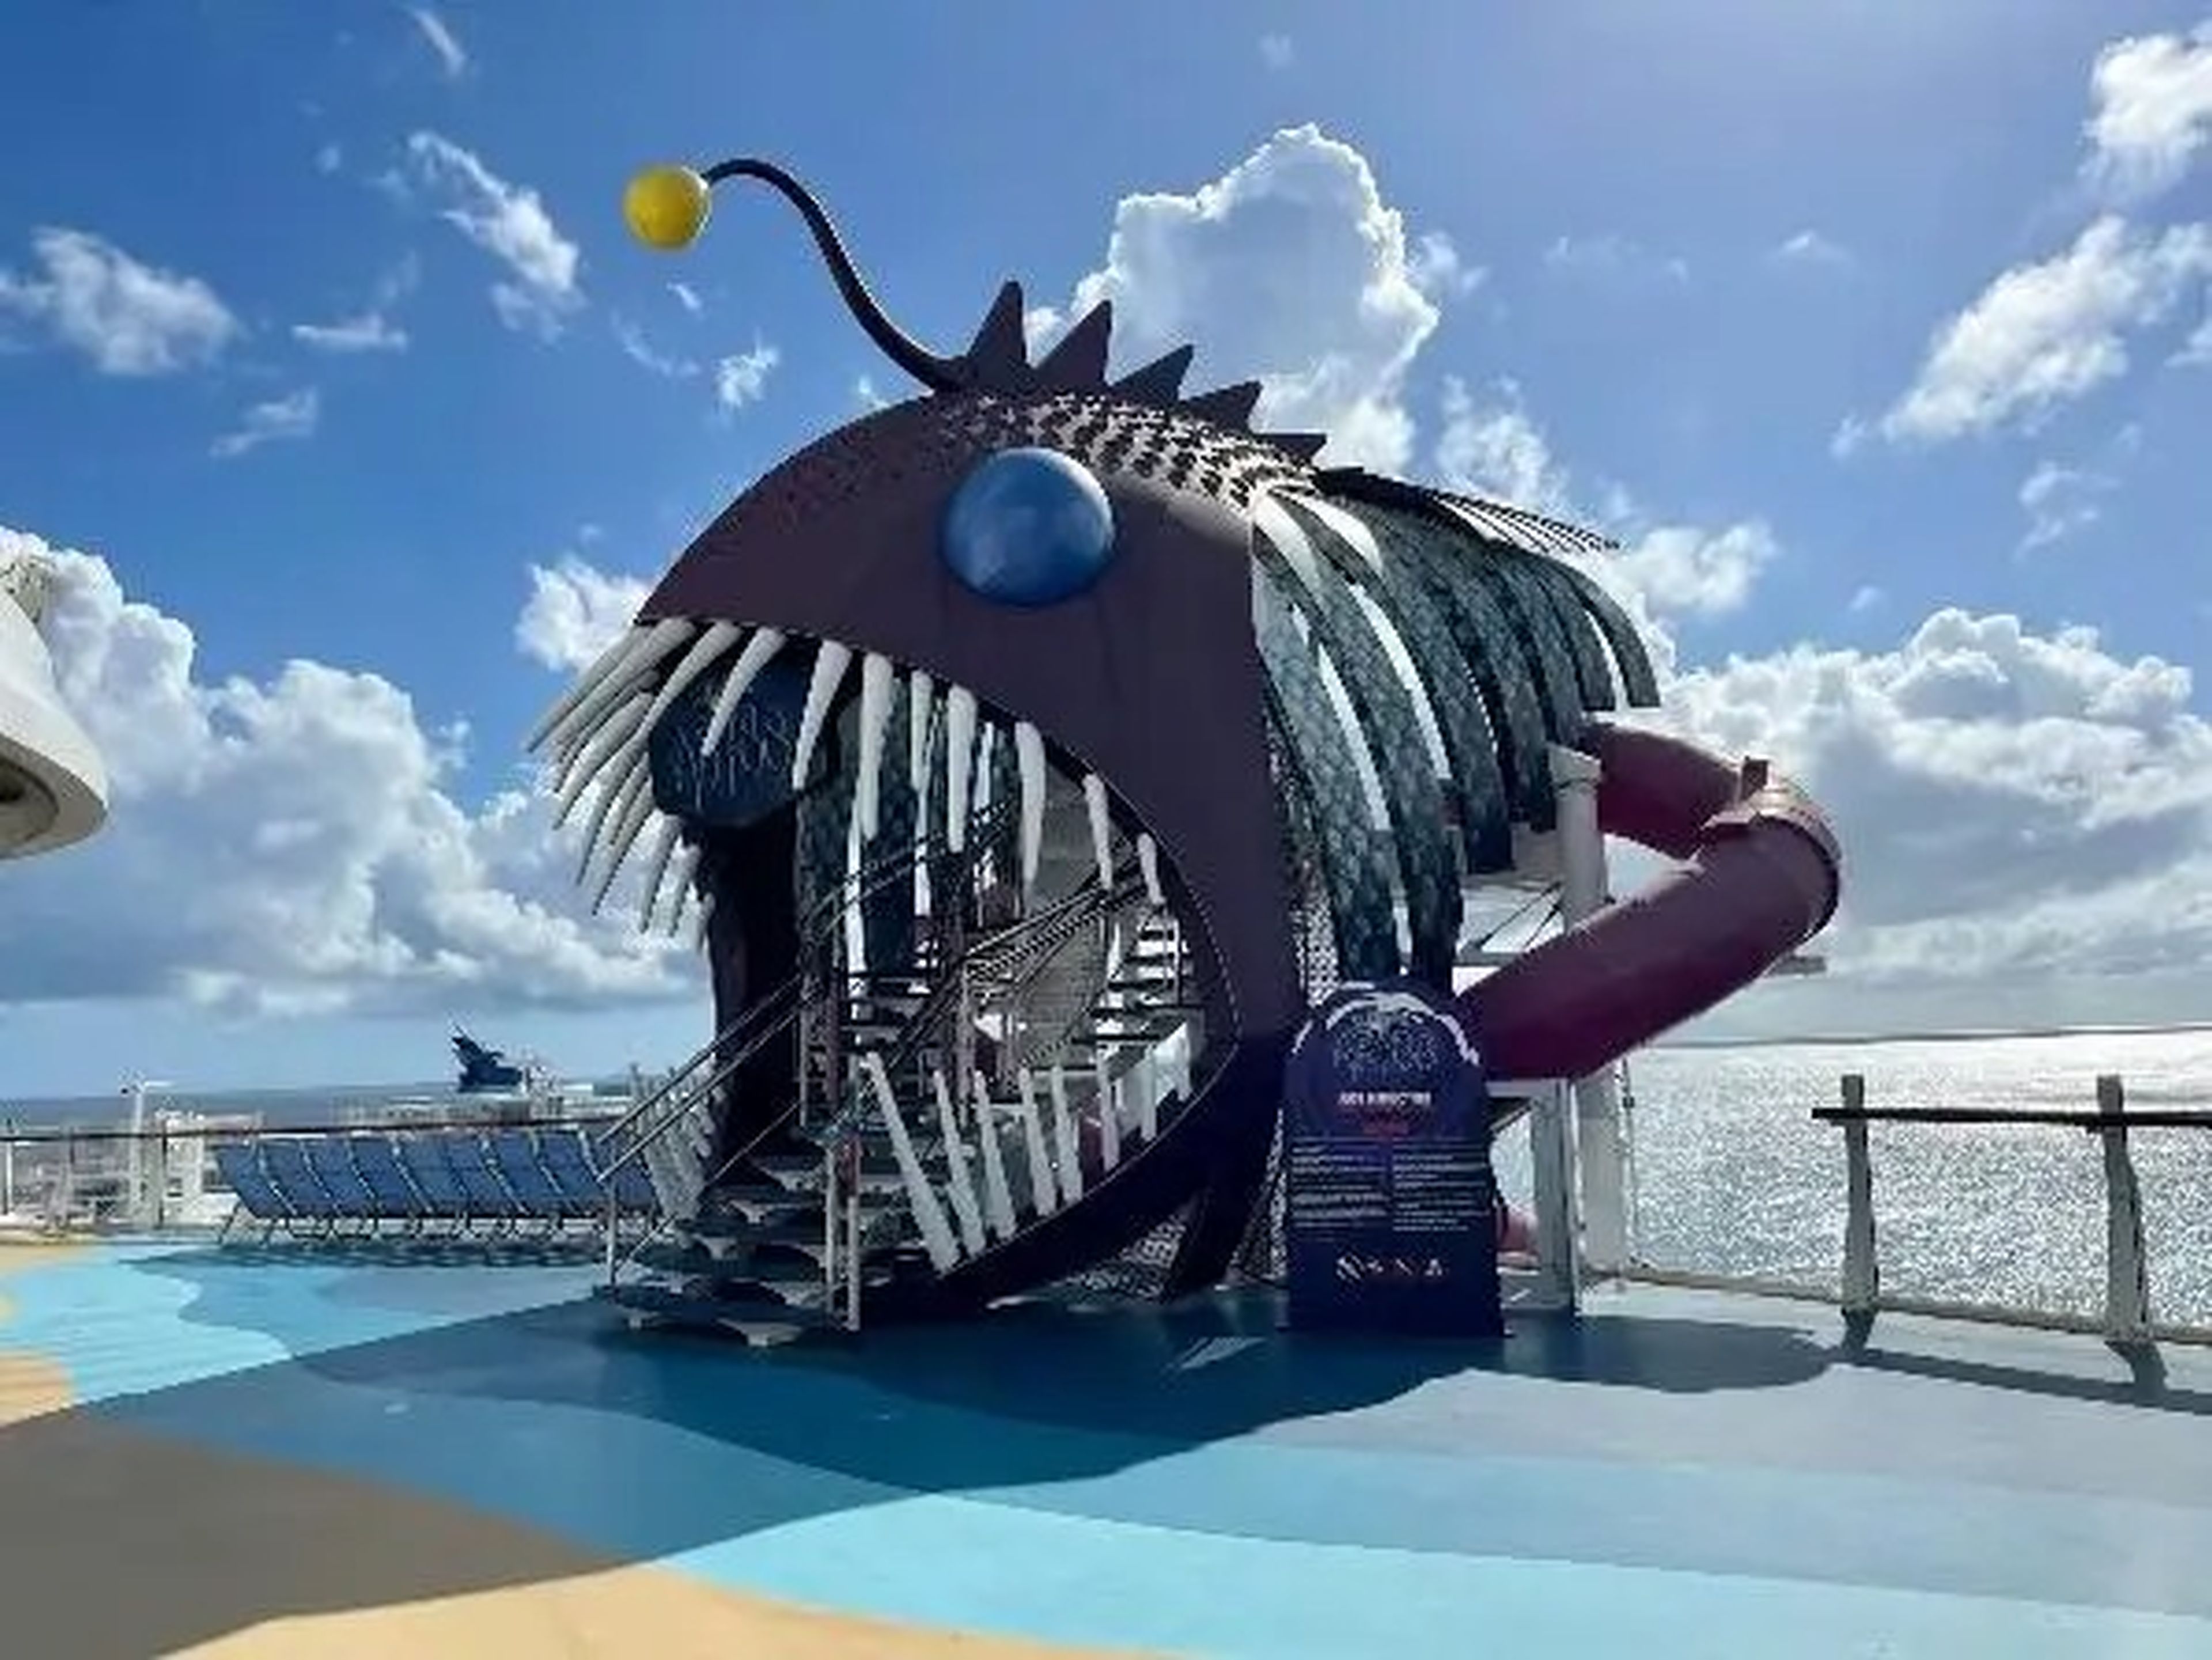 the Ultimate Abyss slide on the symphony of the seas